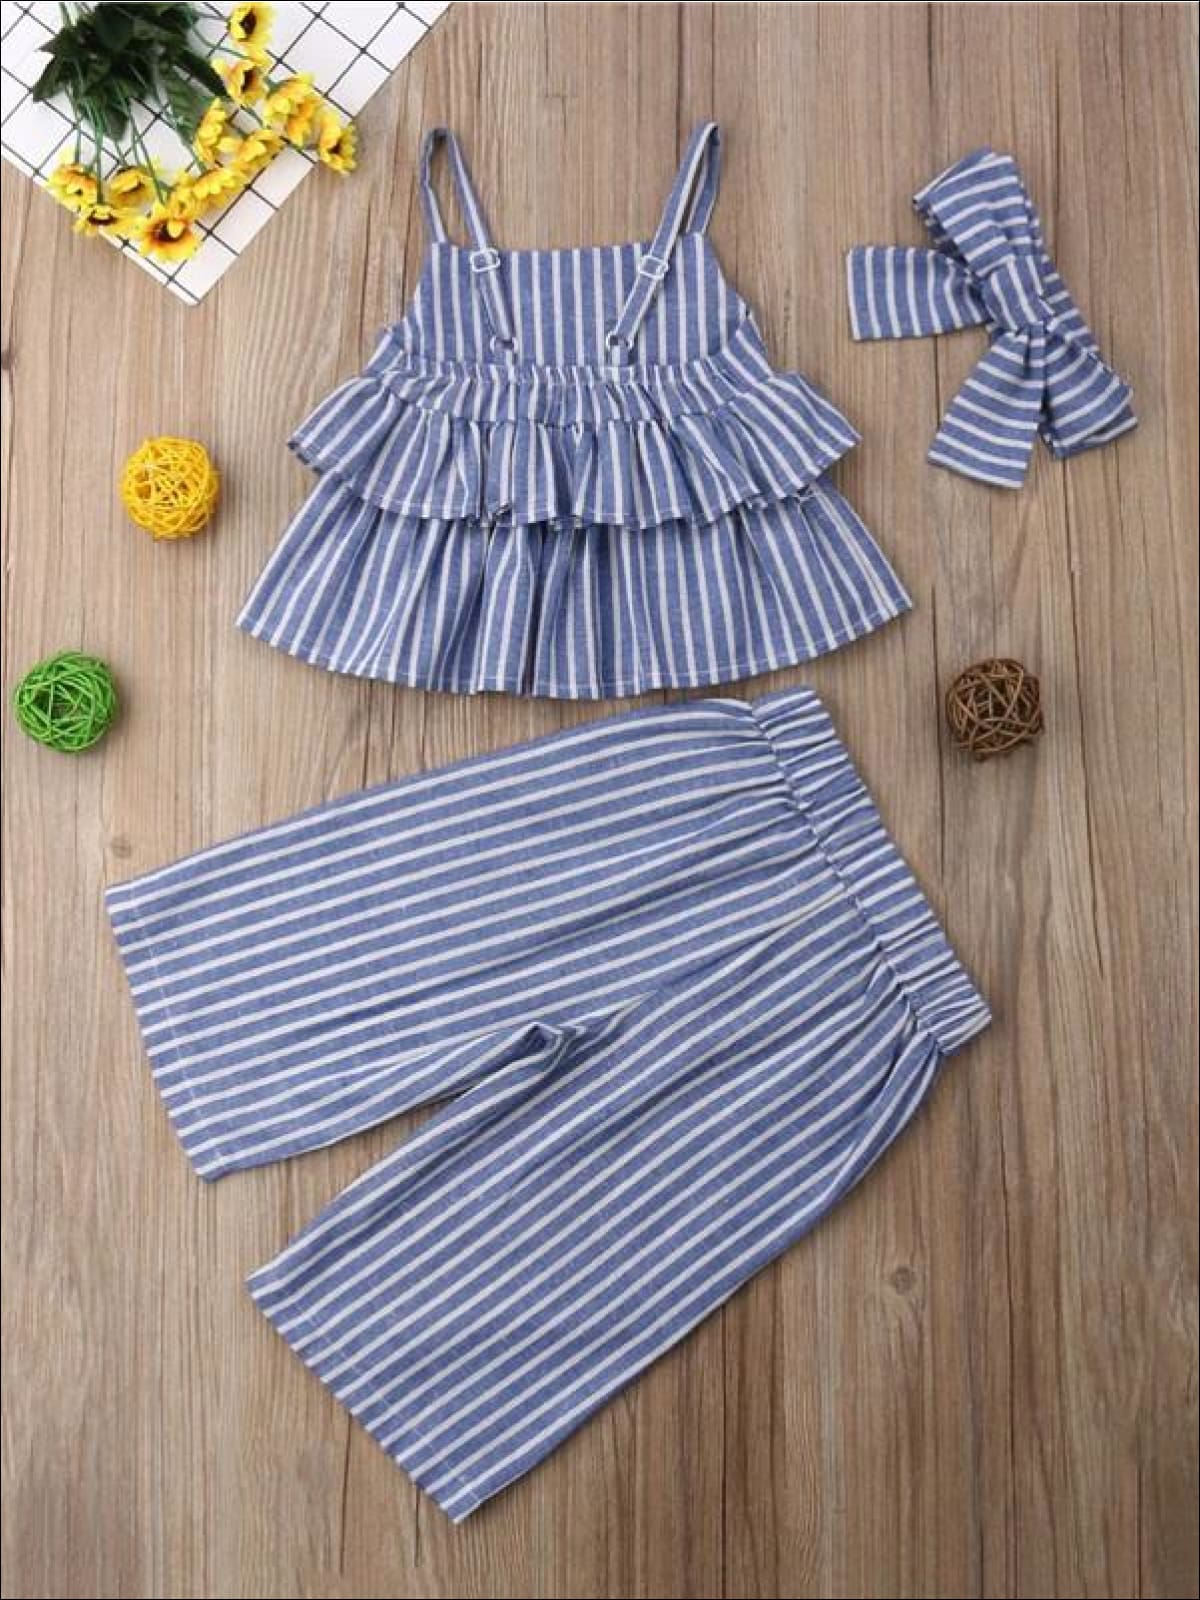 Girls Ruffle Tiered Top With Button Down Palazzo Pants & Matching Headband Set - Girls Spring Casual Set